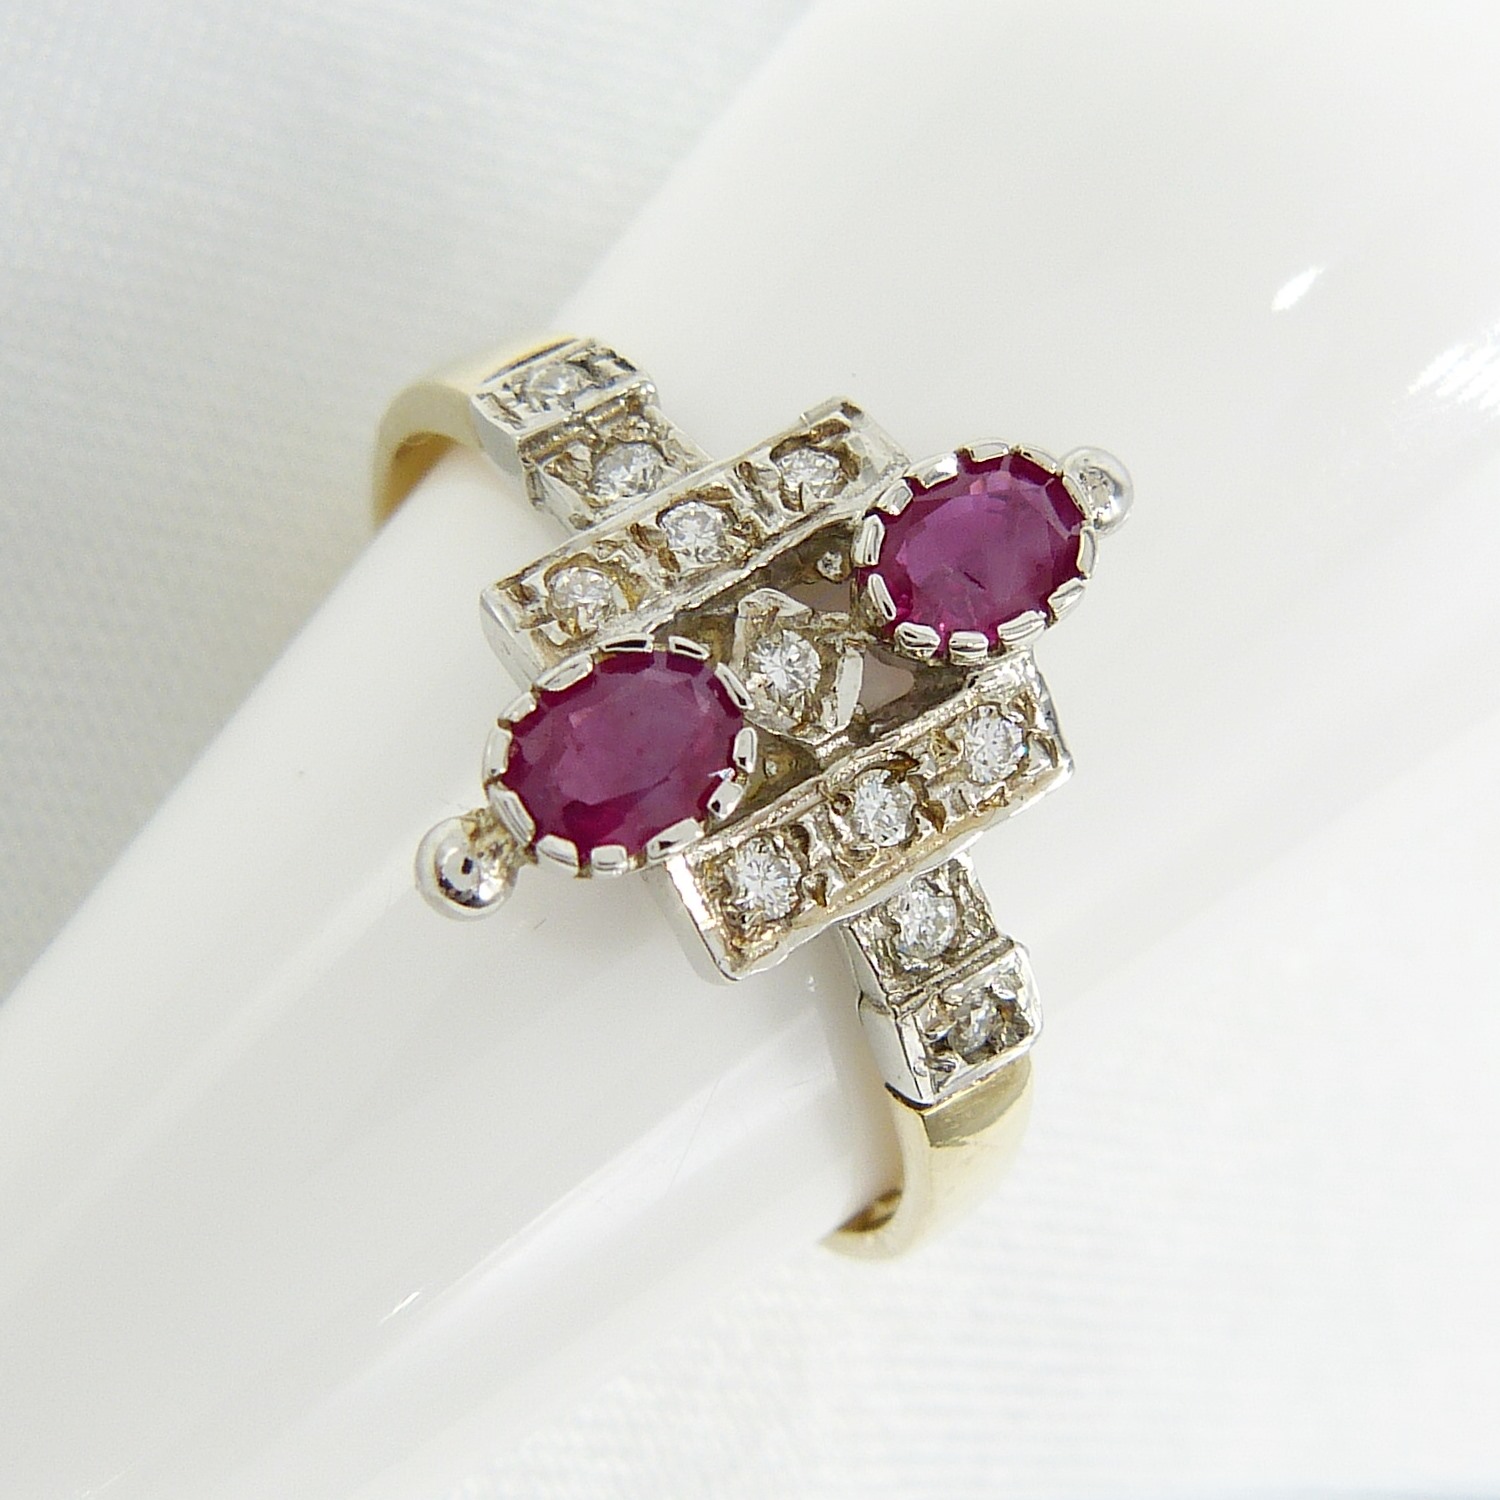 Vintage deco-inspired yellow and white gold ring set with rubies and diamonds - Image 5 of 8